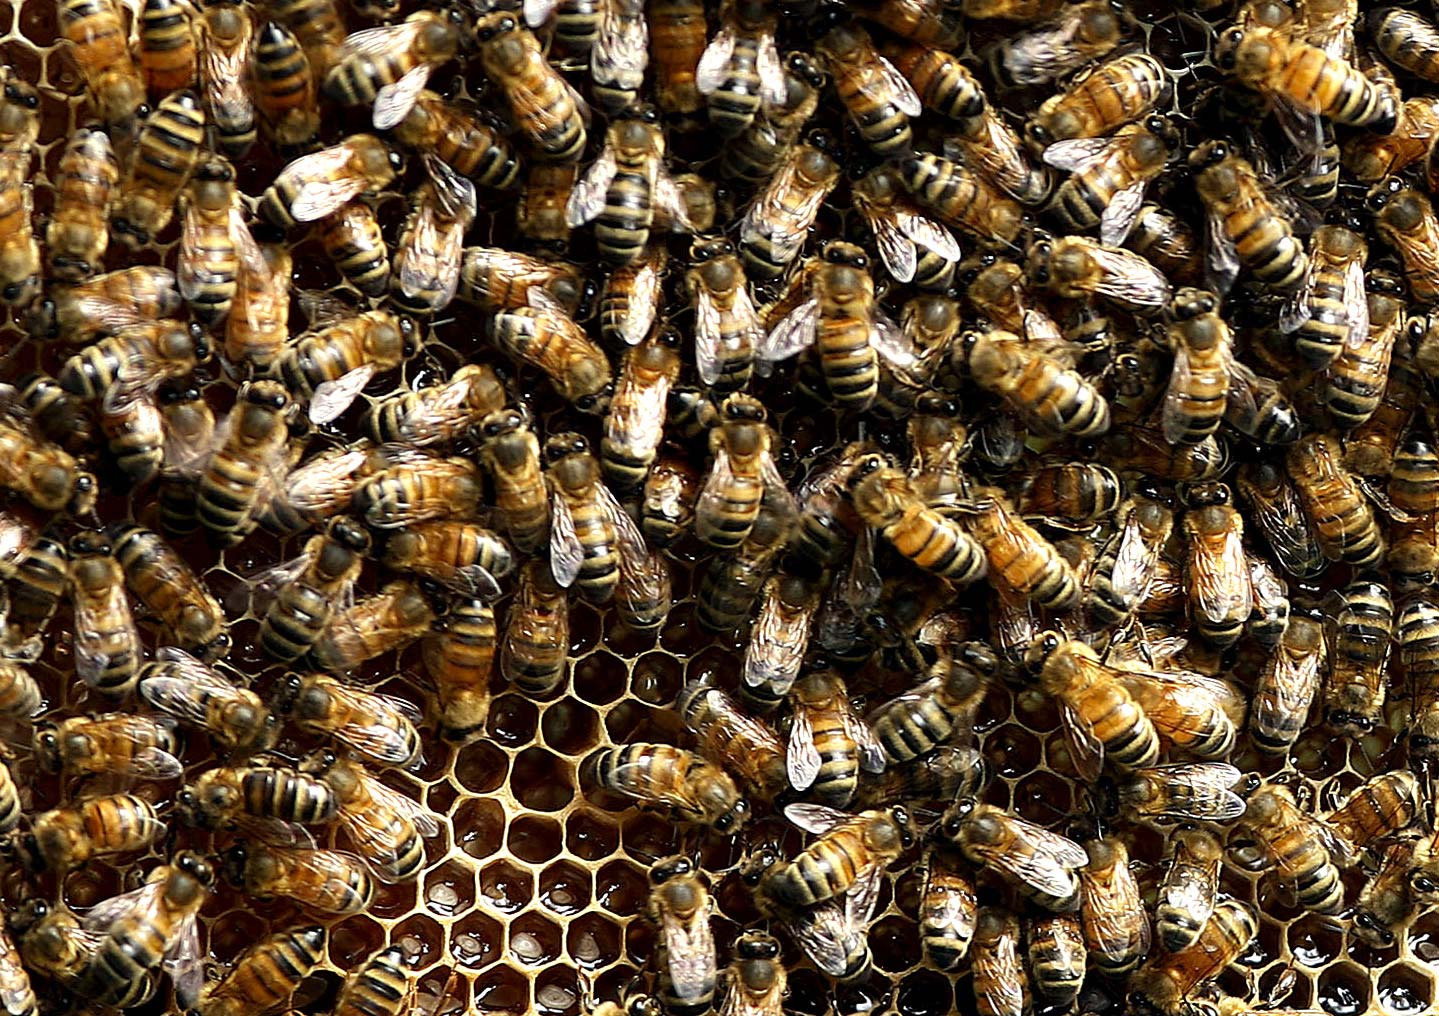 Bees crawl over a honeycomb section removed from one the beehives at Lambeth Palace, London, U.K., on July 23, 2008. (Simon Dawson&mdash;Bloomberg/Getty Images)